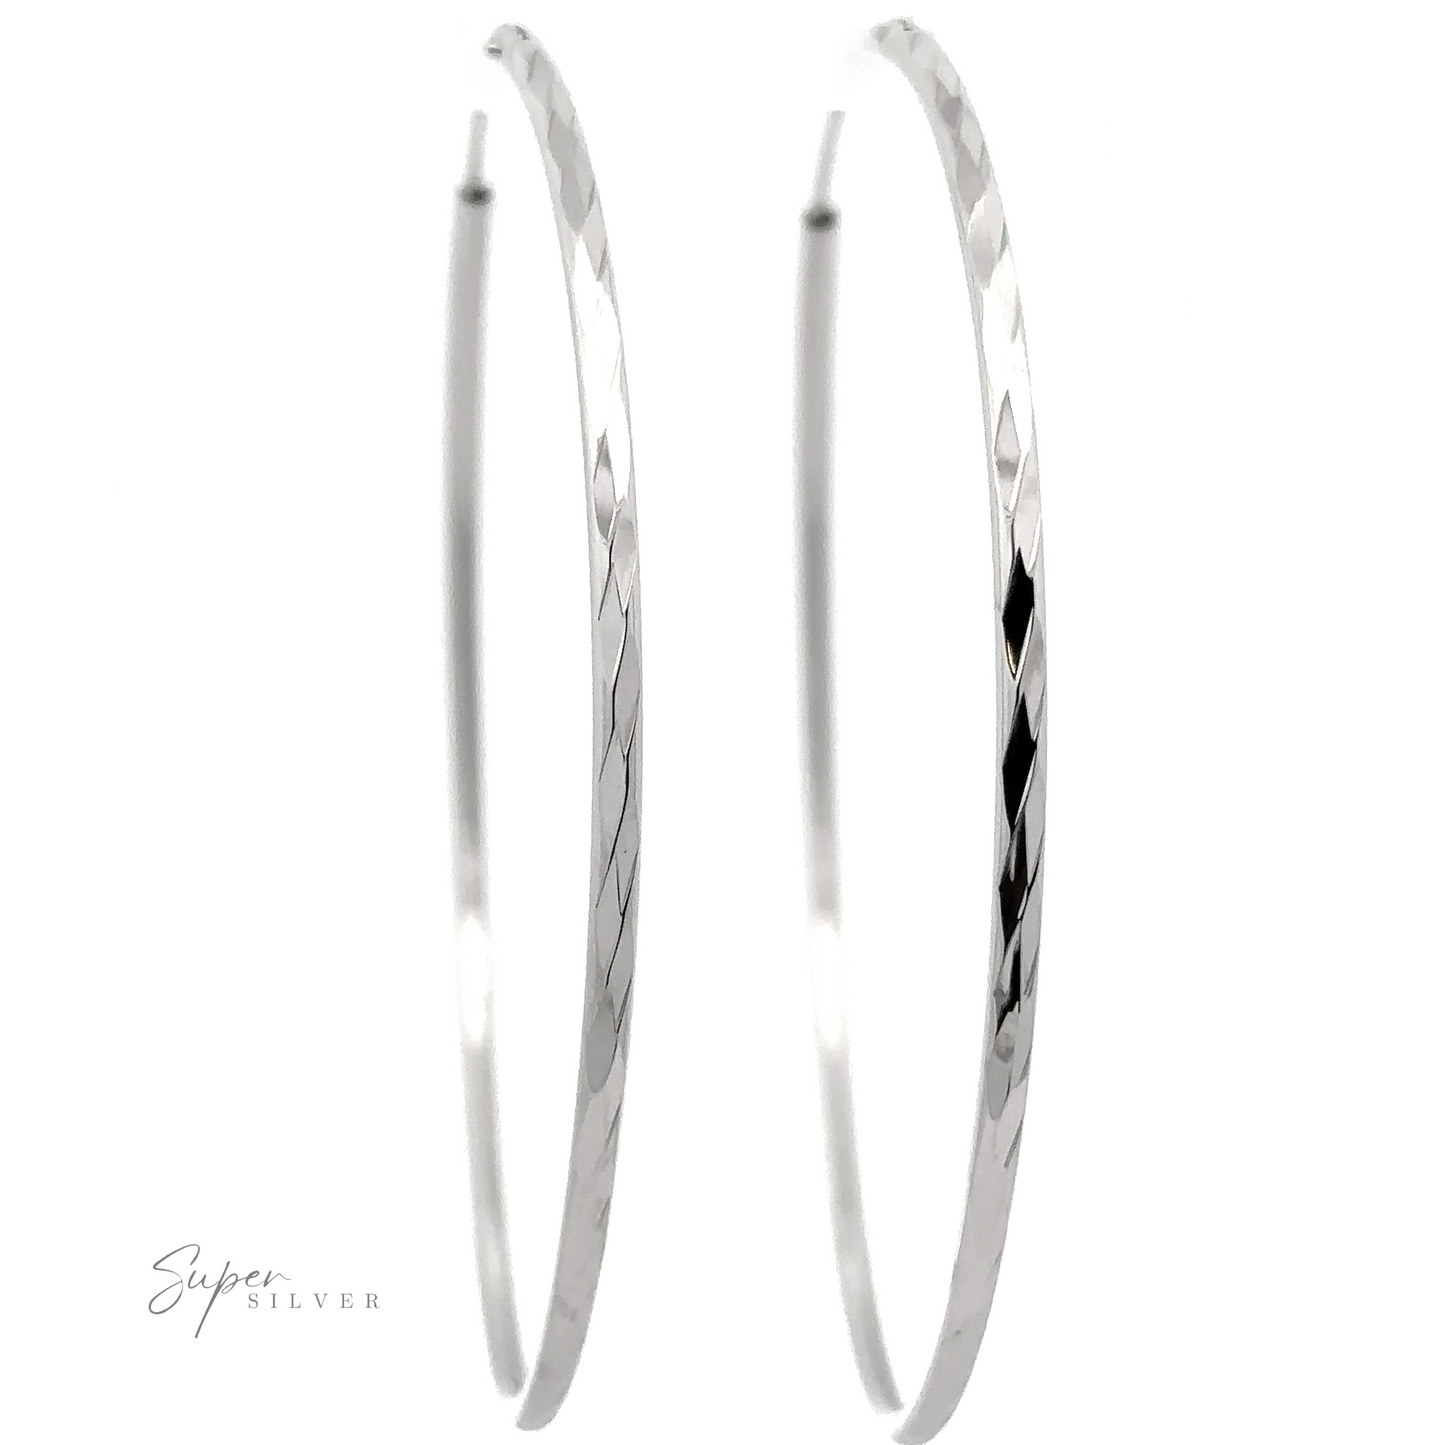 
                  
                    Large, thin Sparkling 2mm Faceted Twisted Hoops with a subtle textured pattern and a rhodium finish, displayed against a plain white background. A "Super Silver" watermark is visible in the lower left corner.
                  
                